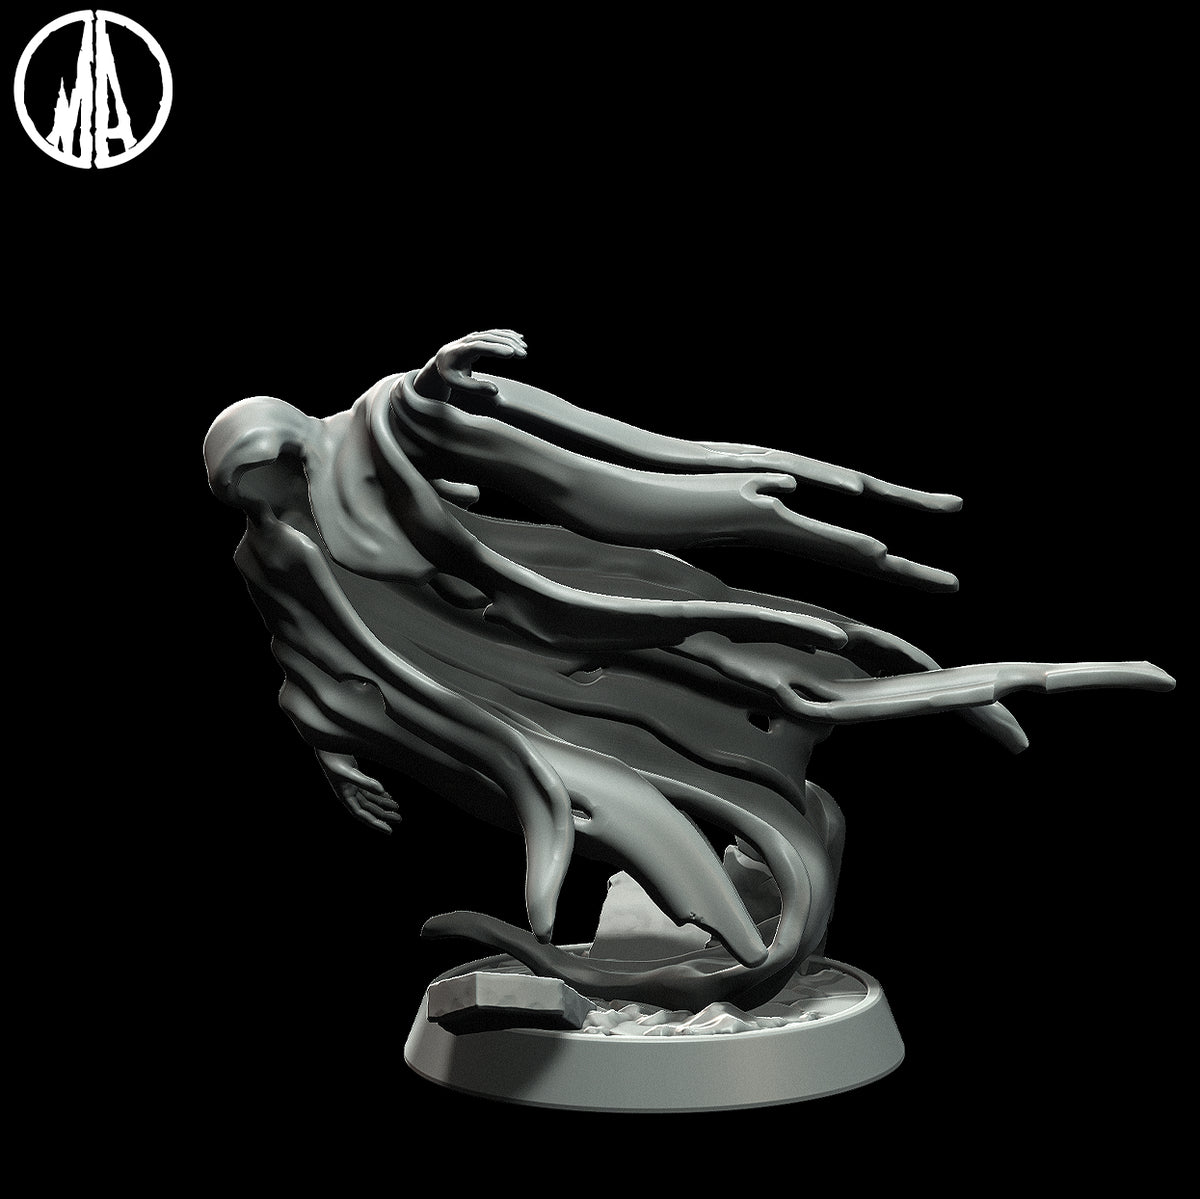 Ghosts | 32mm Scale Resin Model | From the Lost Souls Collection